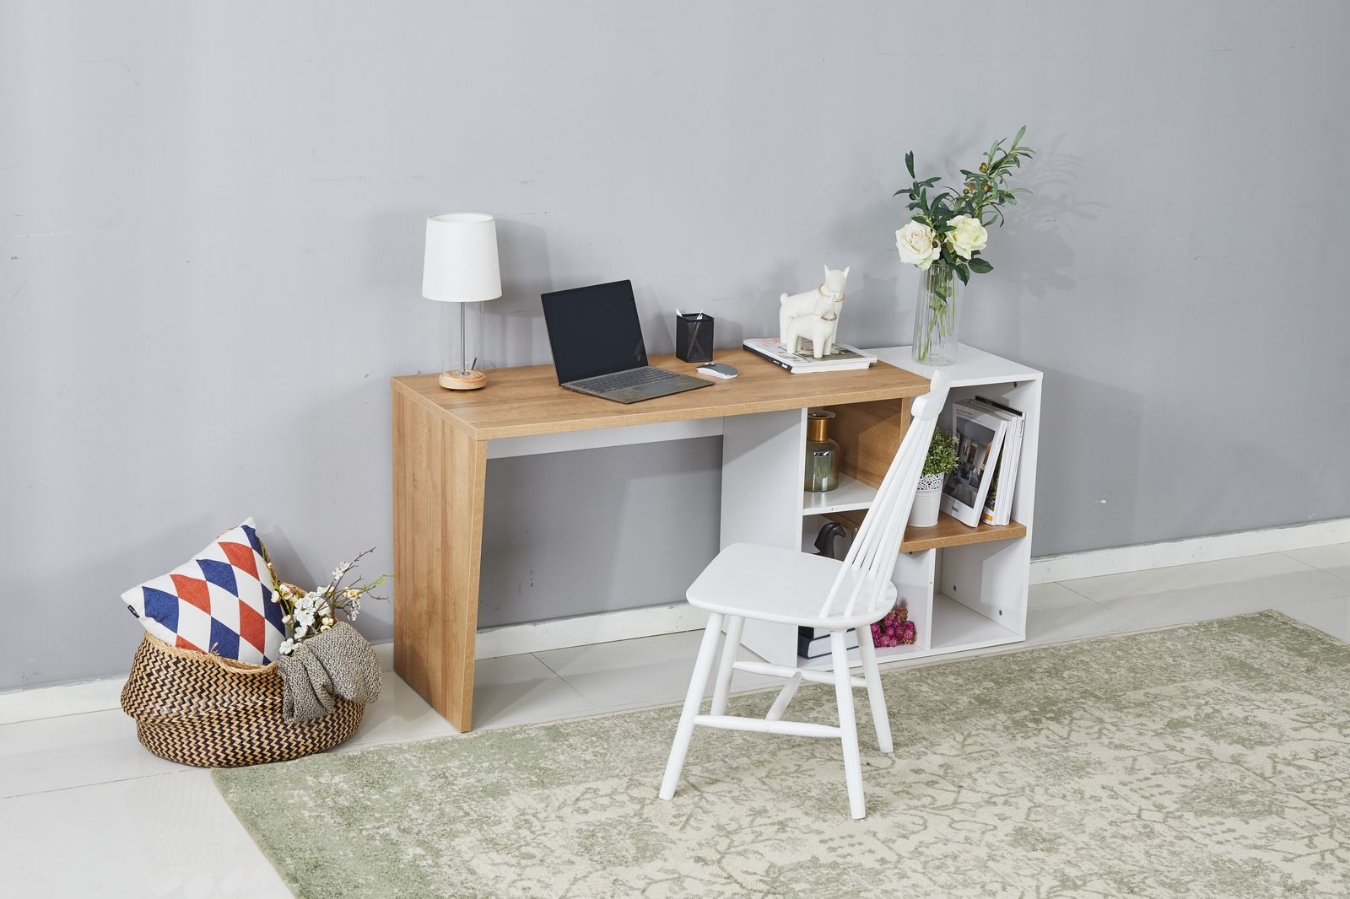 The versatility, charm and space-saving solution of this Tony Study Desk Range offers clean lines and a contemporary design